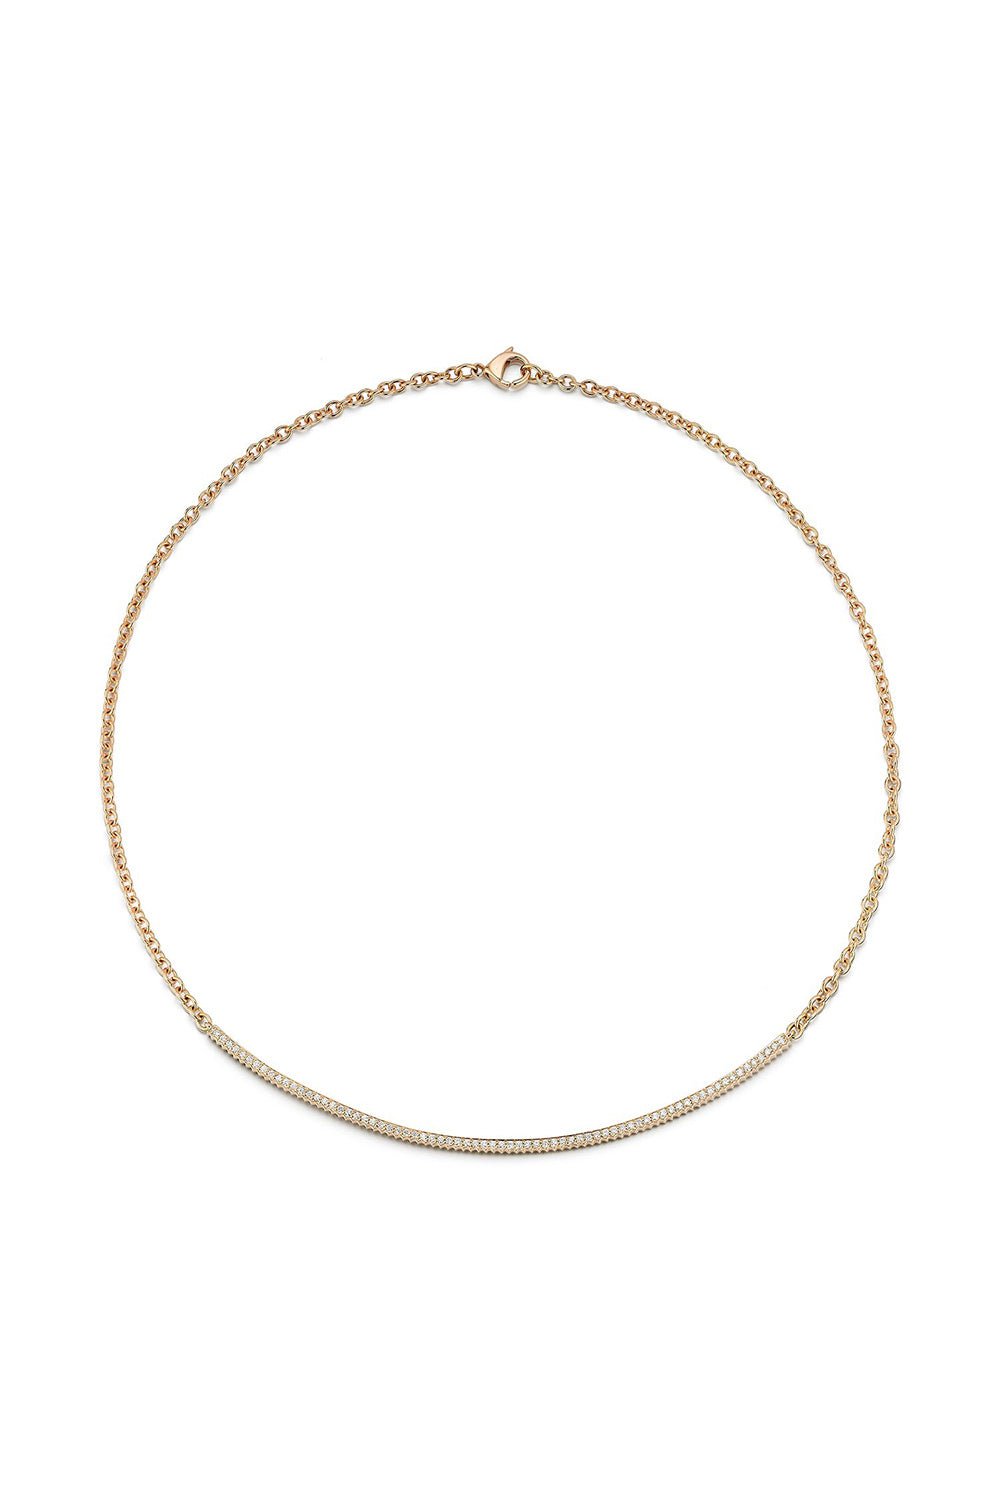 WALTERS FAITH-Clive Fluted Bar Necklace-ROSE GOLD